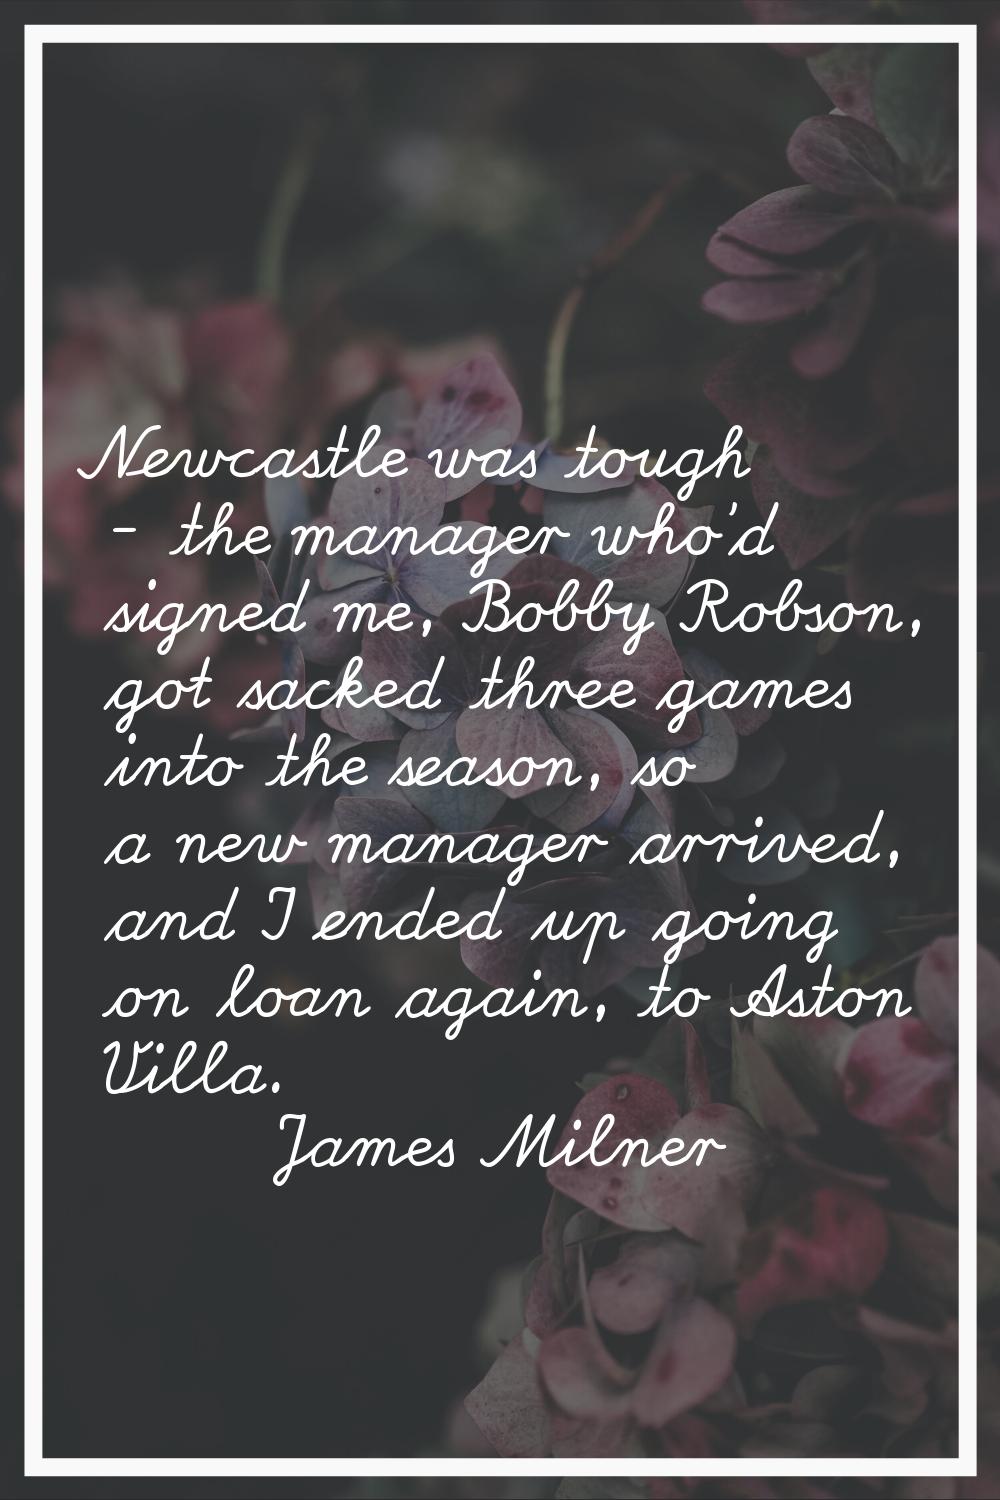 Newcastle was tough - the manager who'd signed me, Bobby Robson, got sacked three games into the se